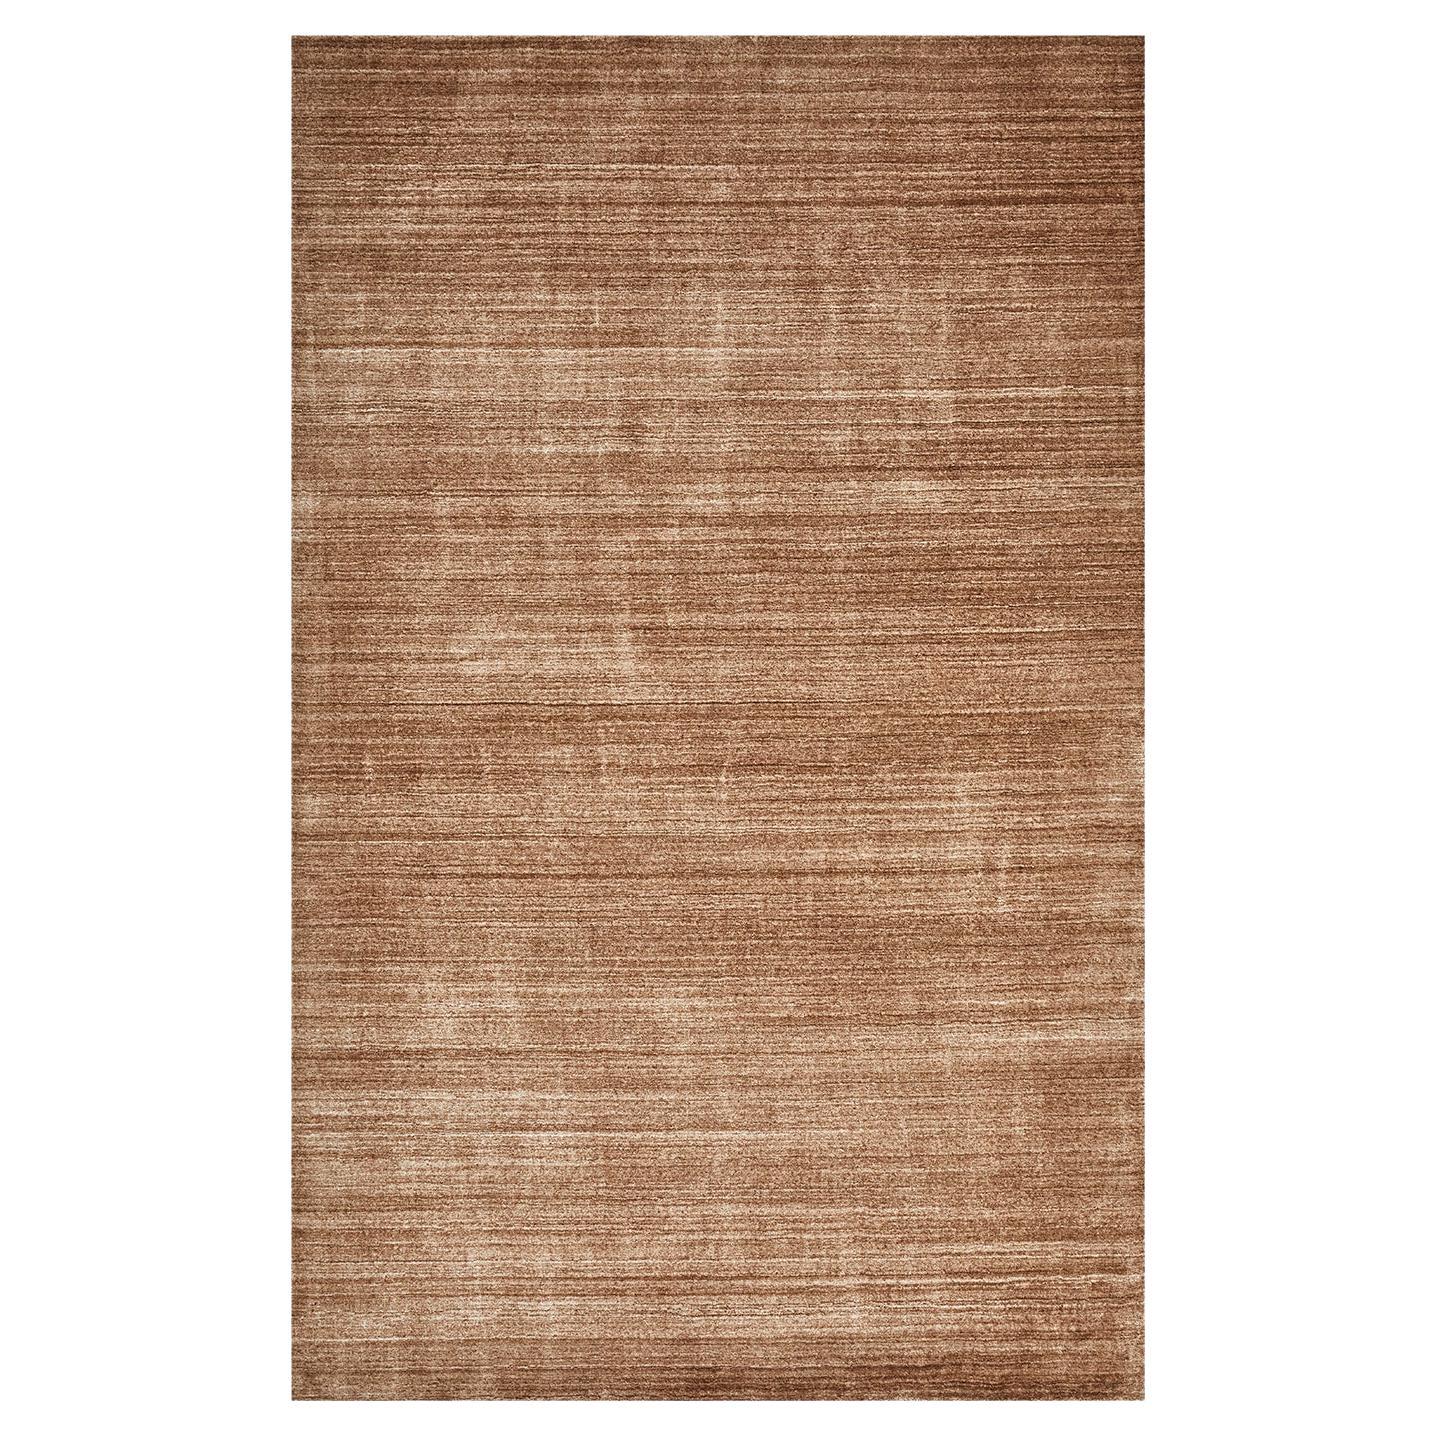 Solo Rugs Solid Modern Hand Loomed Beige 5 x 8 Area Rug im Angebot